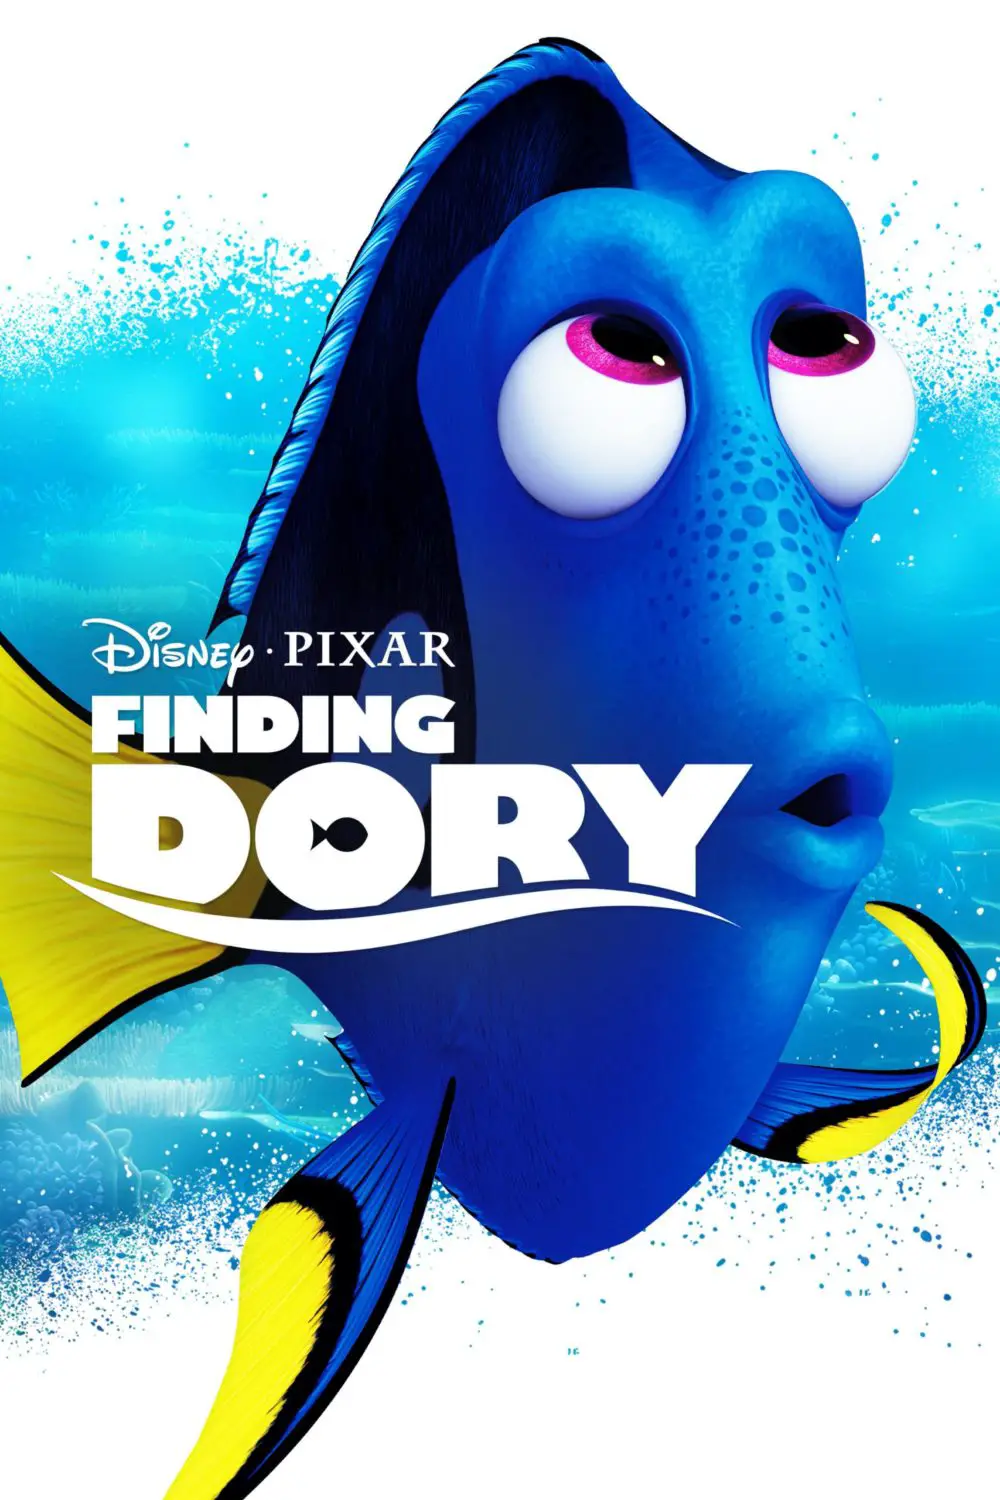 You are currently viewing Finding Dory